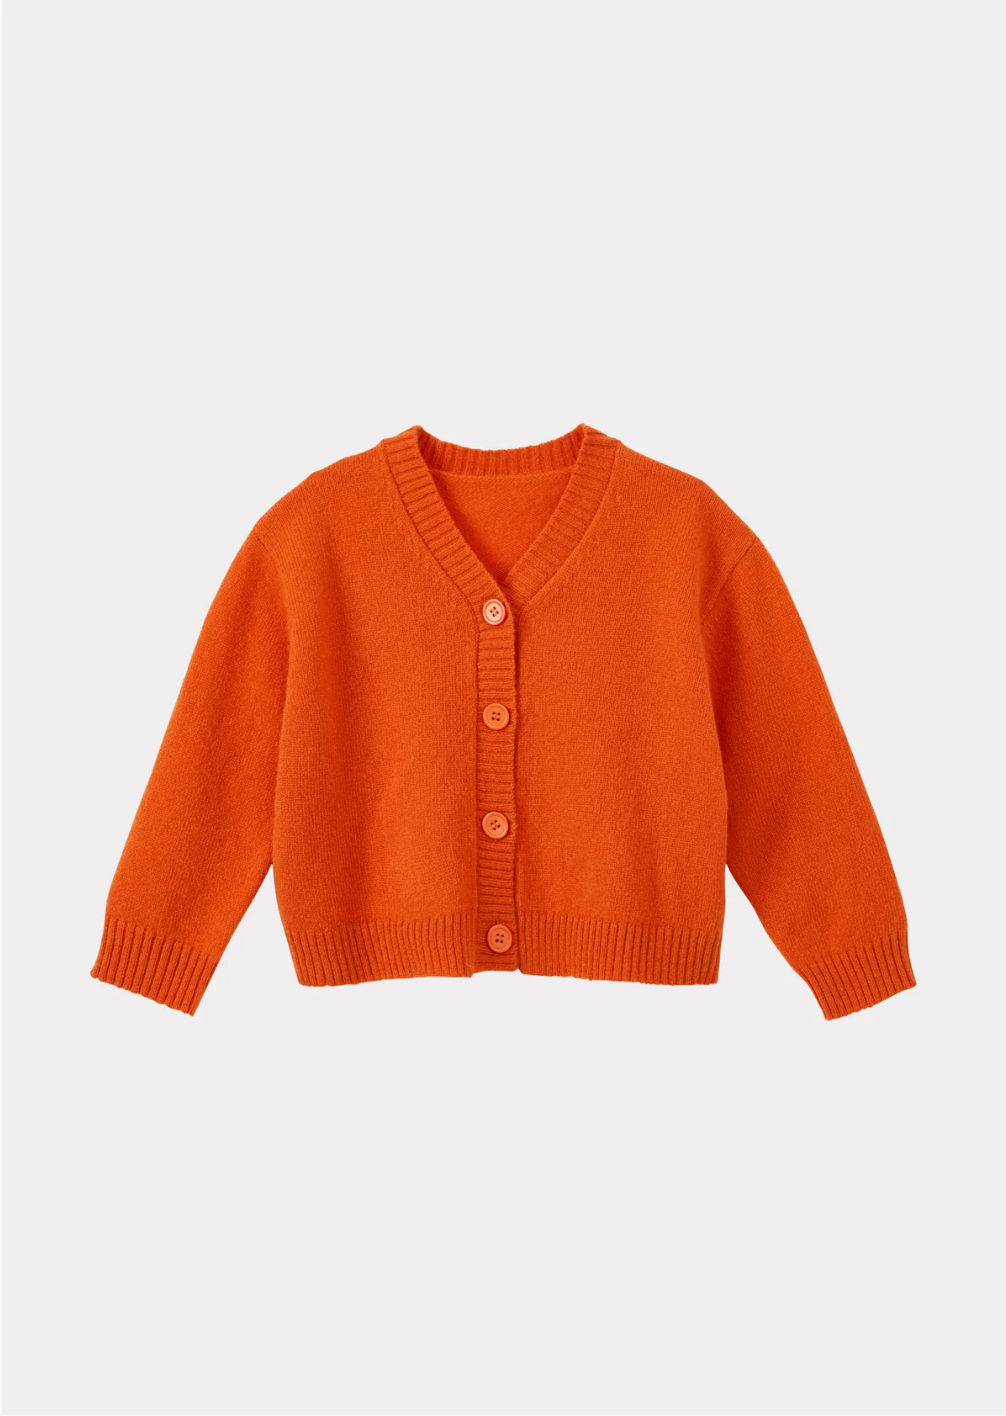 COPPER PARTY CARDIGAN - CLEMENTINE